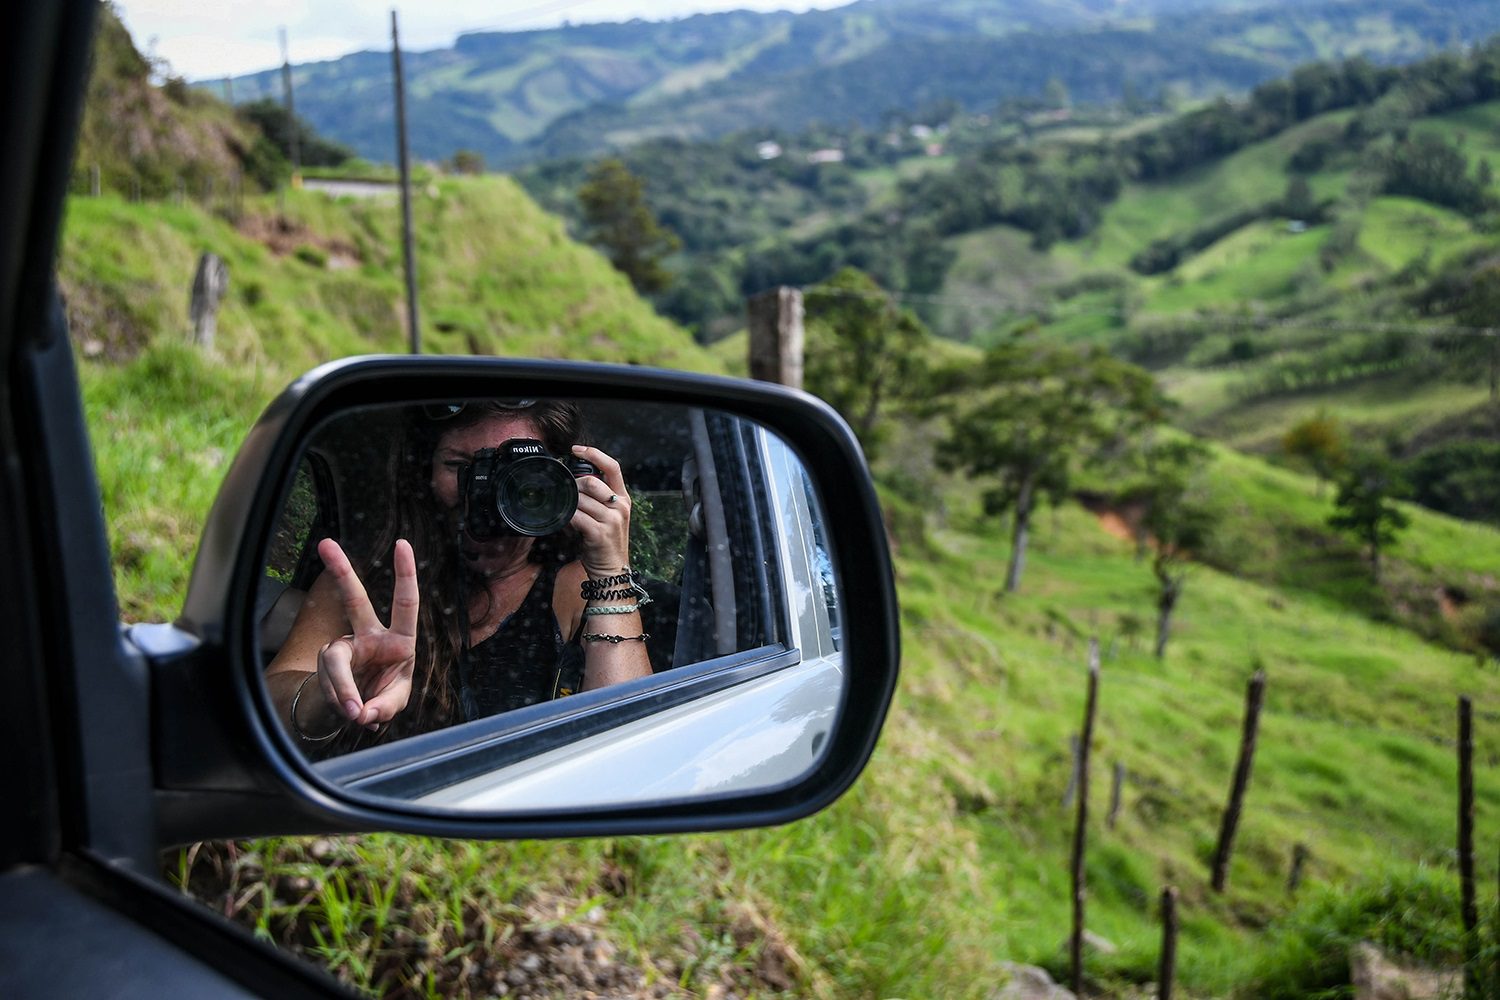 Renting+a+Car+in+Costa+Rica+Countryside+with+Camera